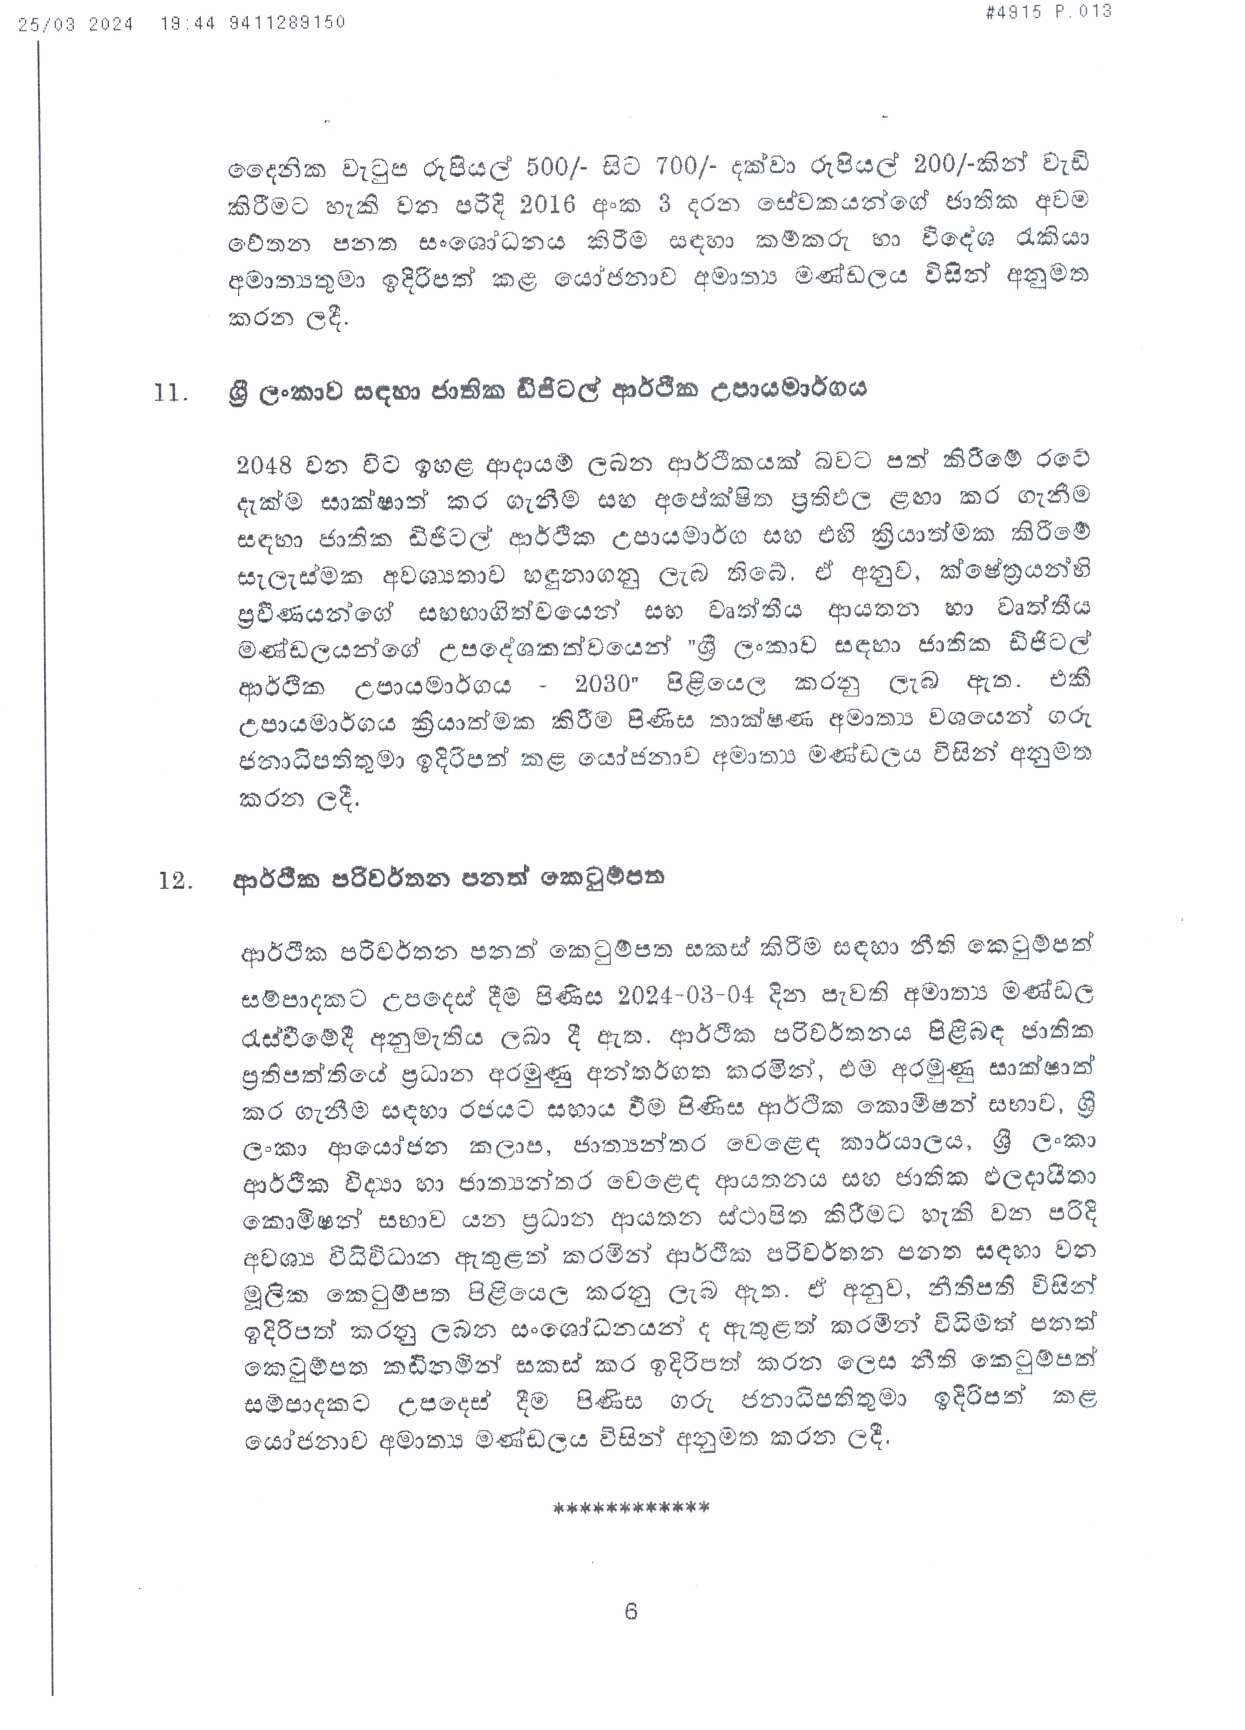 Cabinet Decision on 25.03.2024 page 00061